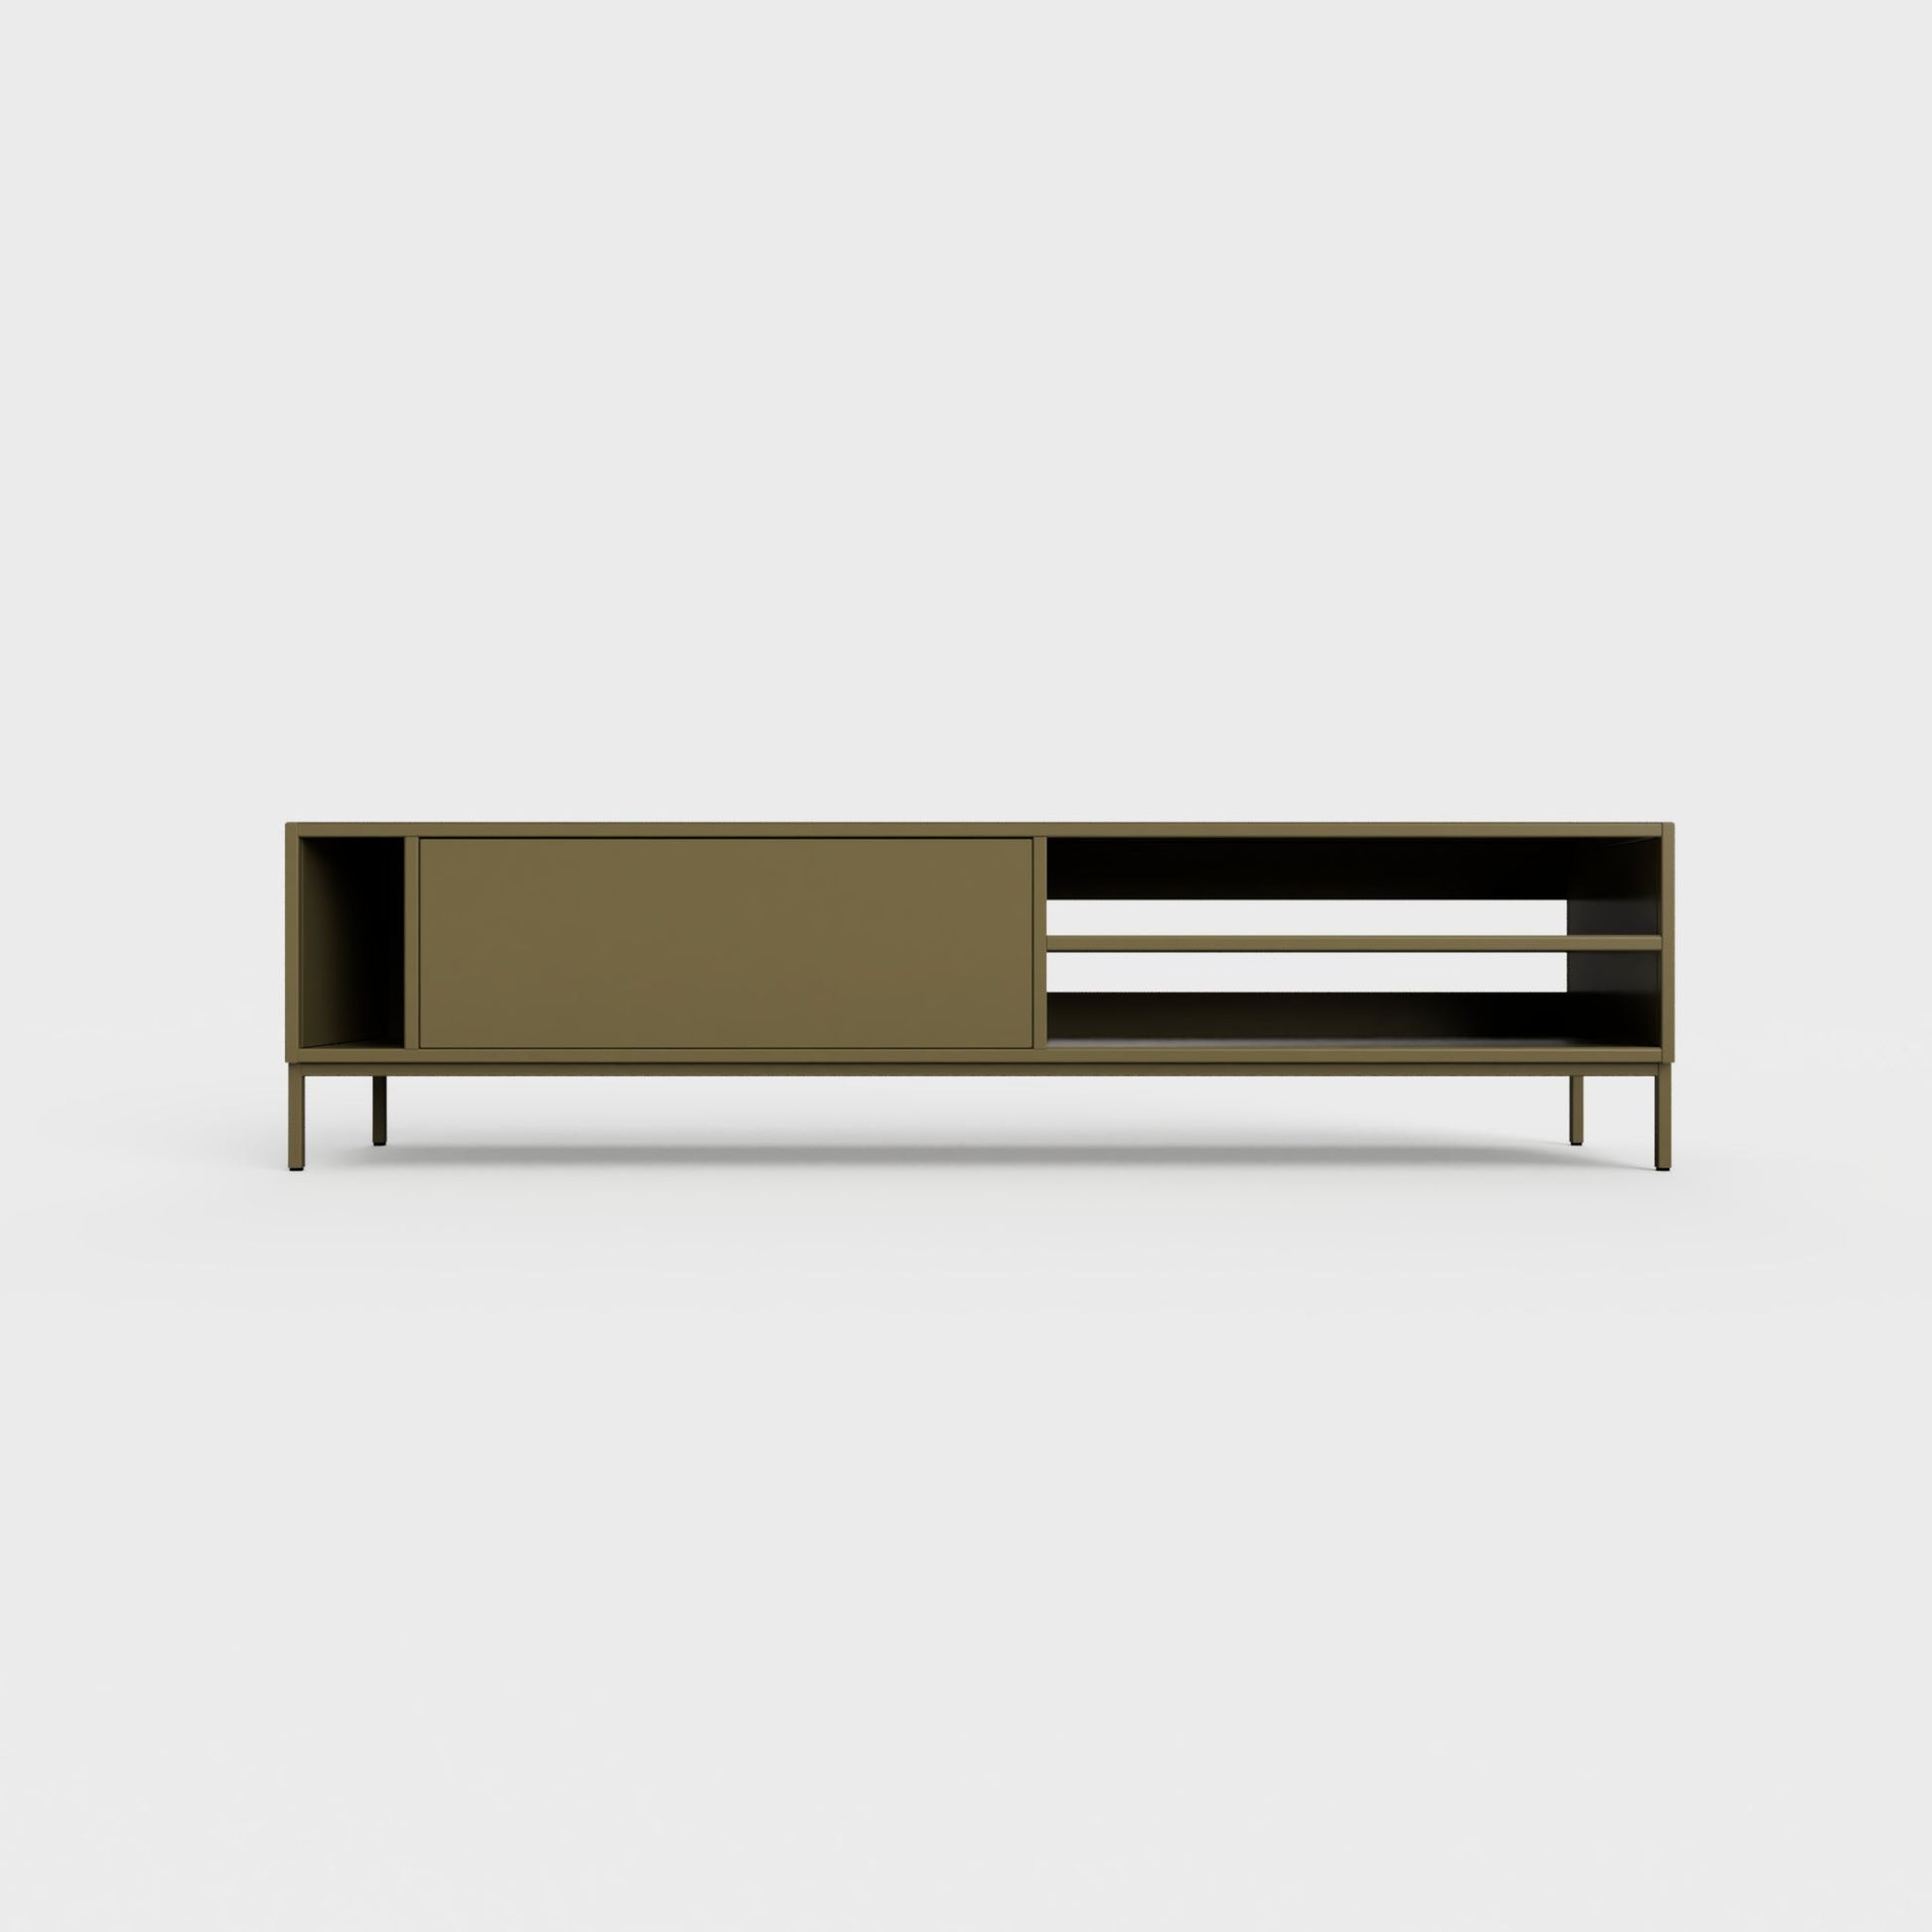 Prunus 03 Lowboard in brown olive color, powder-coated steel, elegant and modern piece of furniture for your living room